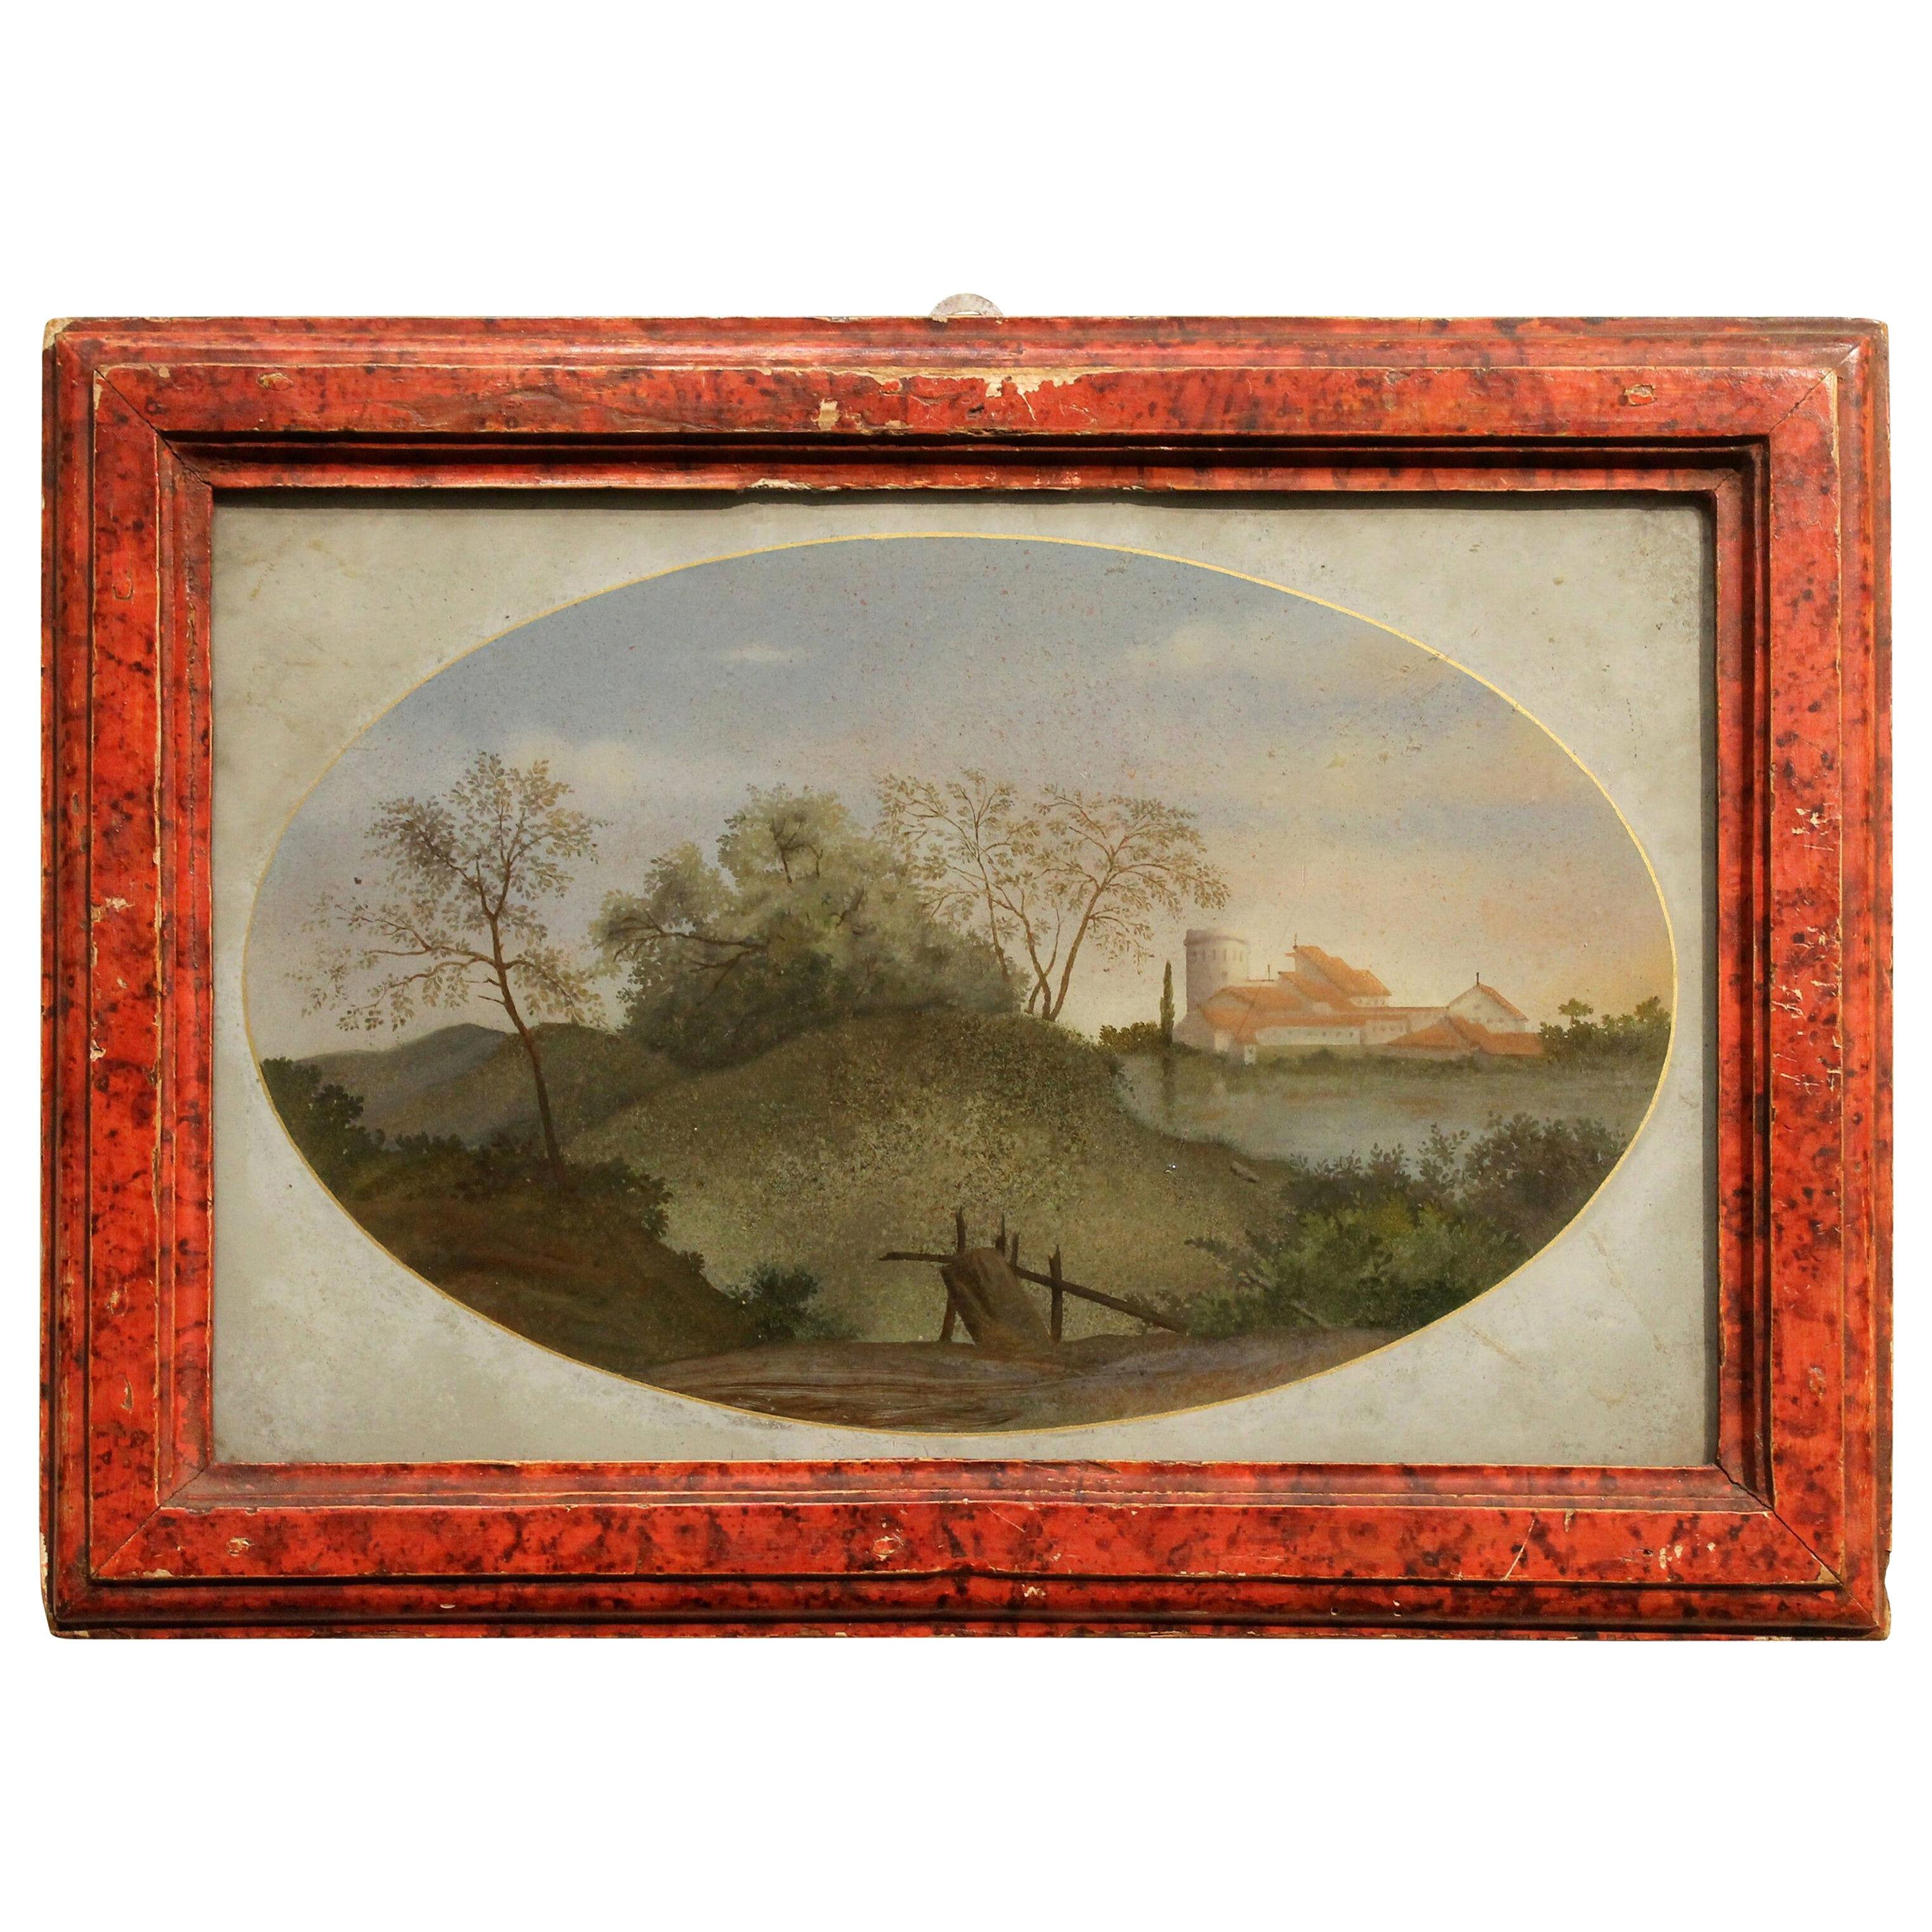 18th Century Italian Landscape Oil Painting on Glass with Red Lacquer Frame